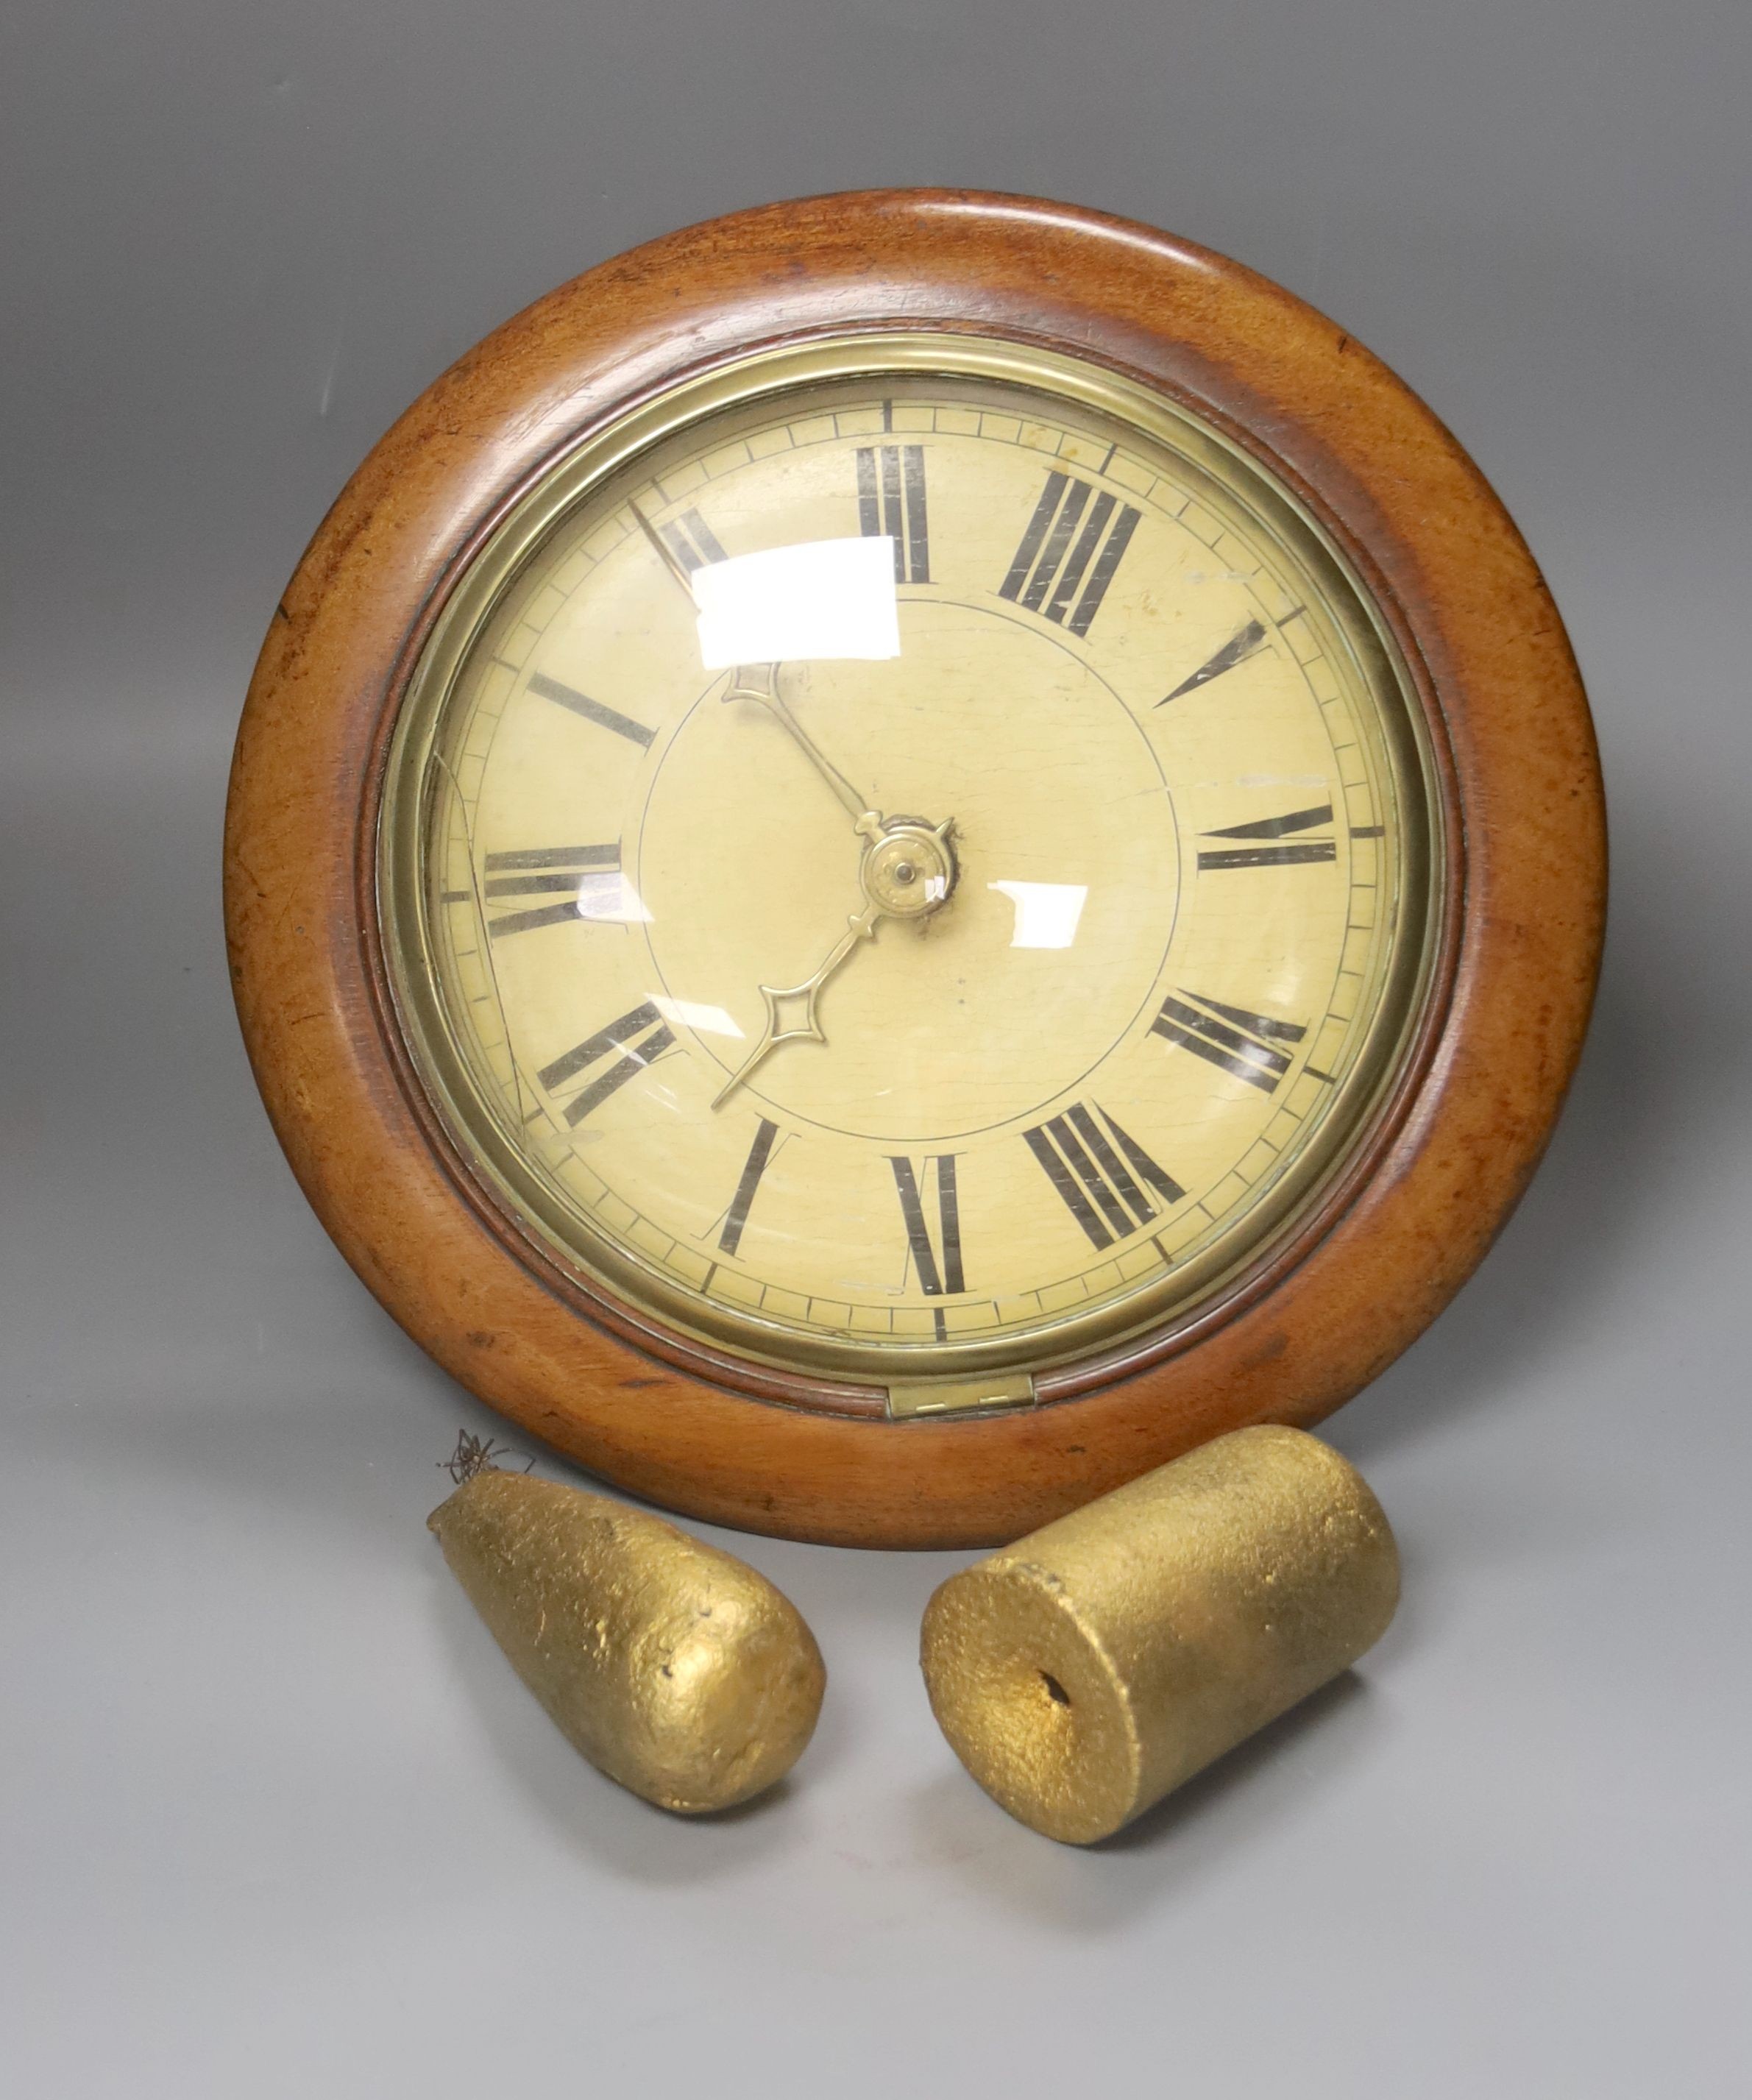 A 19th century Black Forest thirty hour wall clock